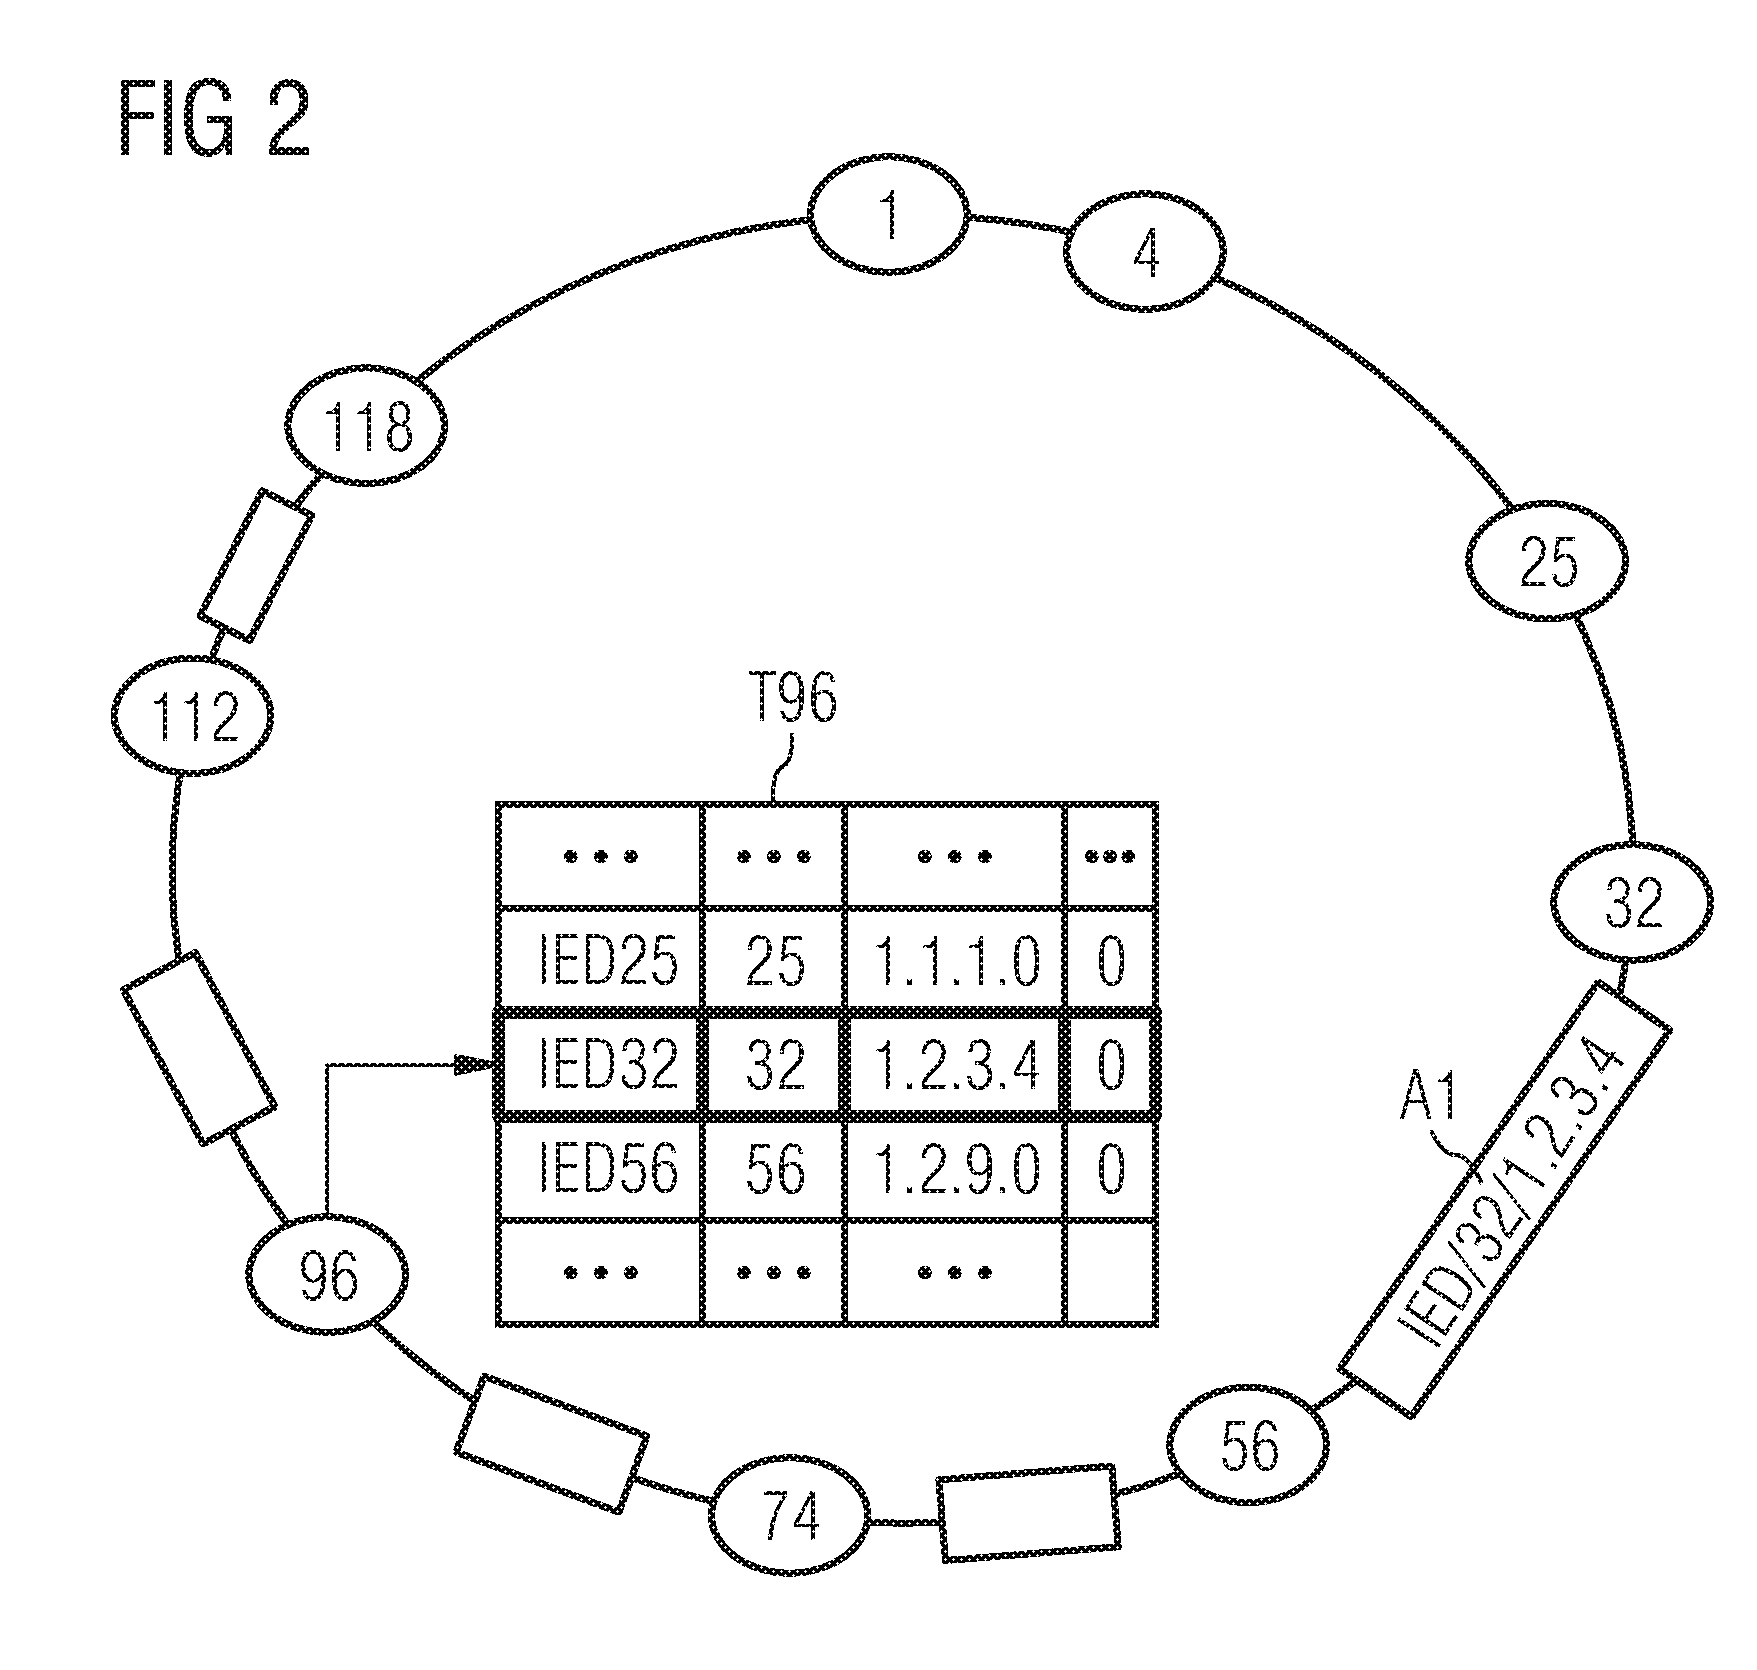 Method for operating a distributed communications network